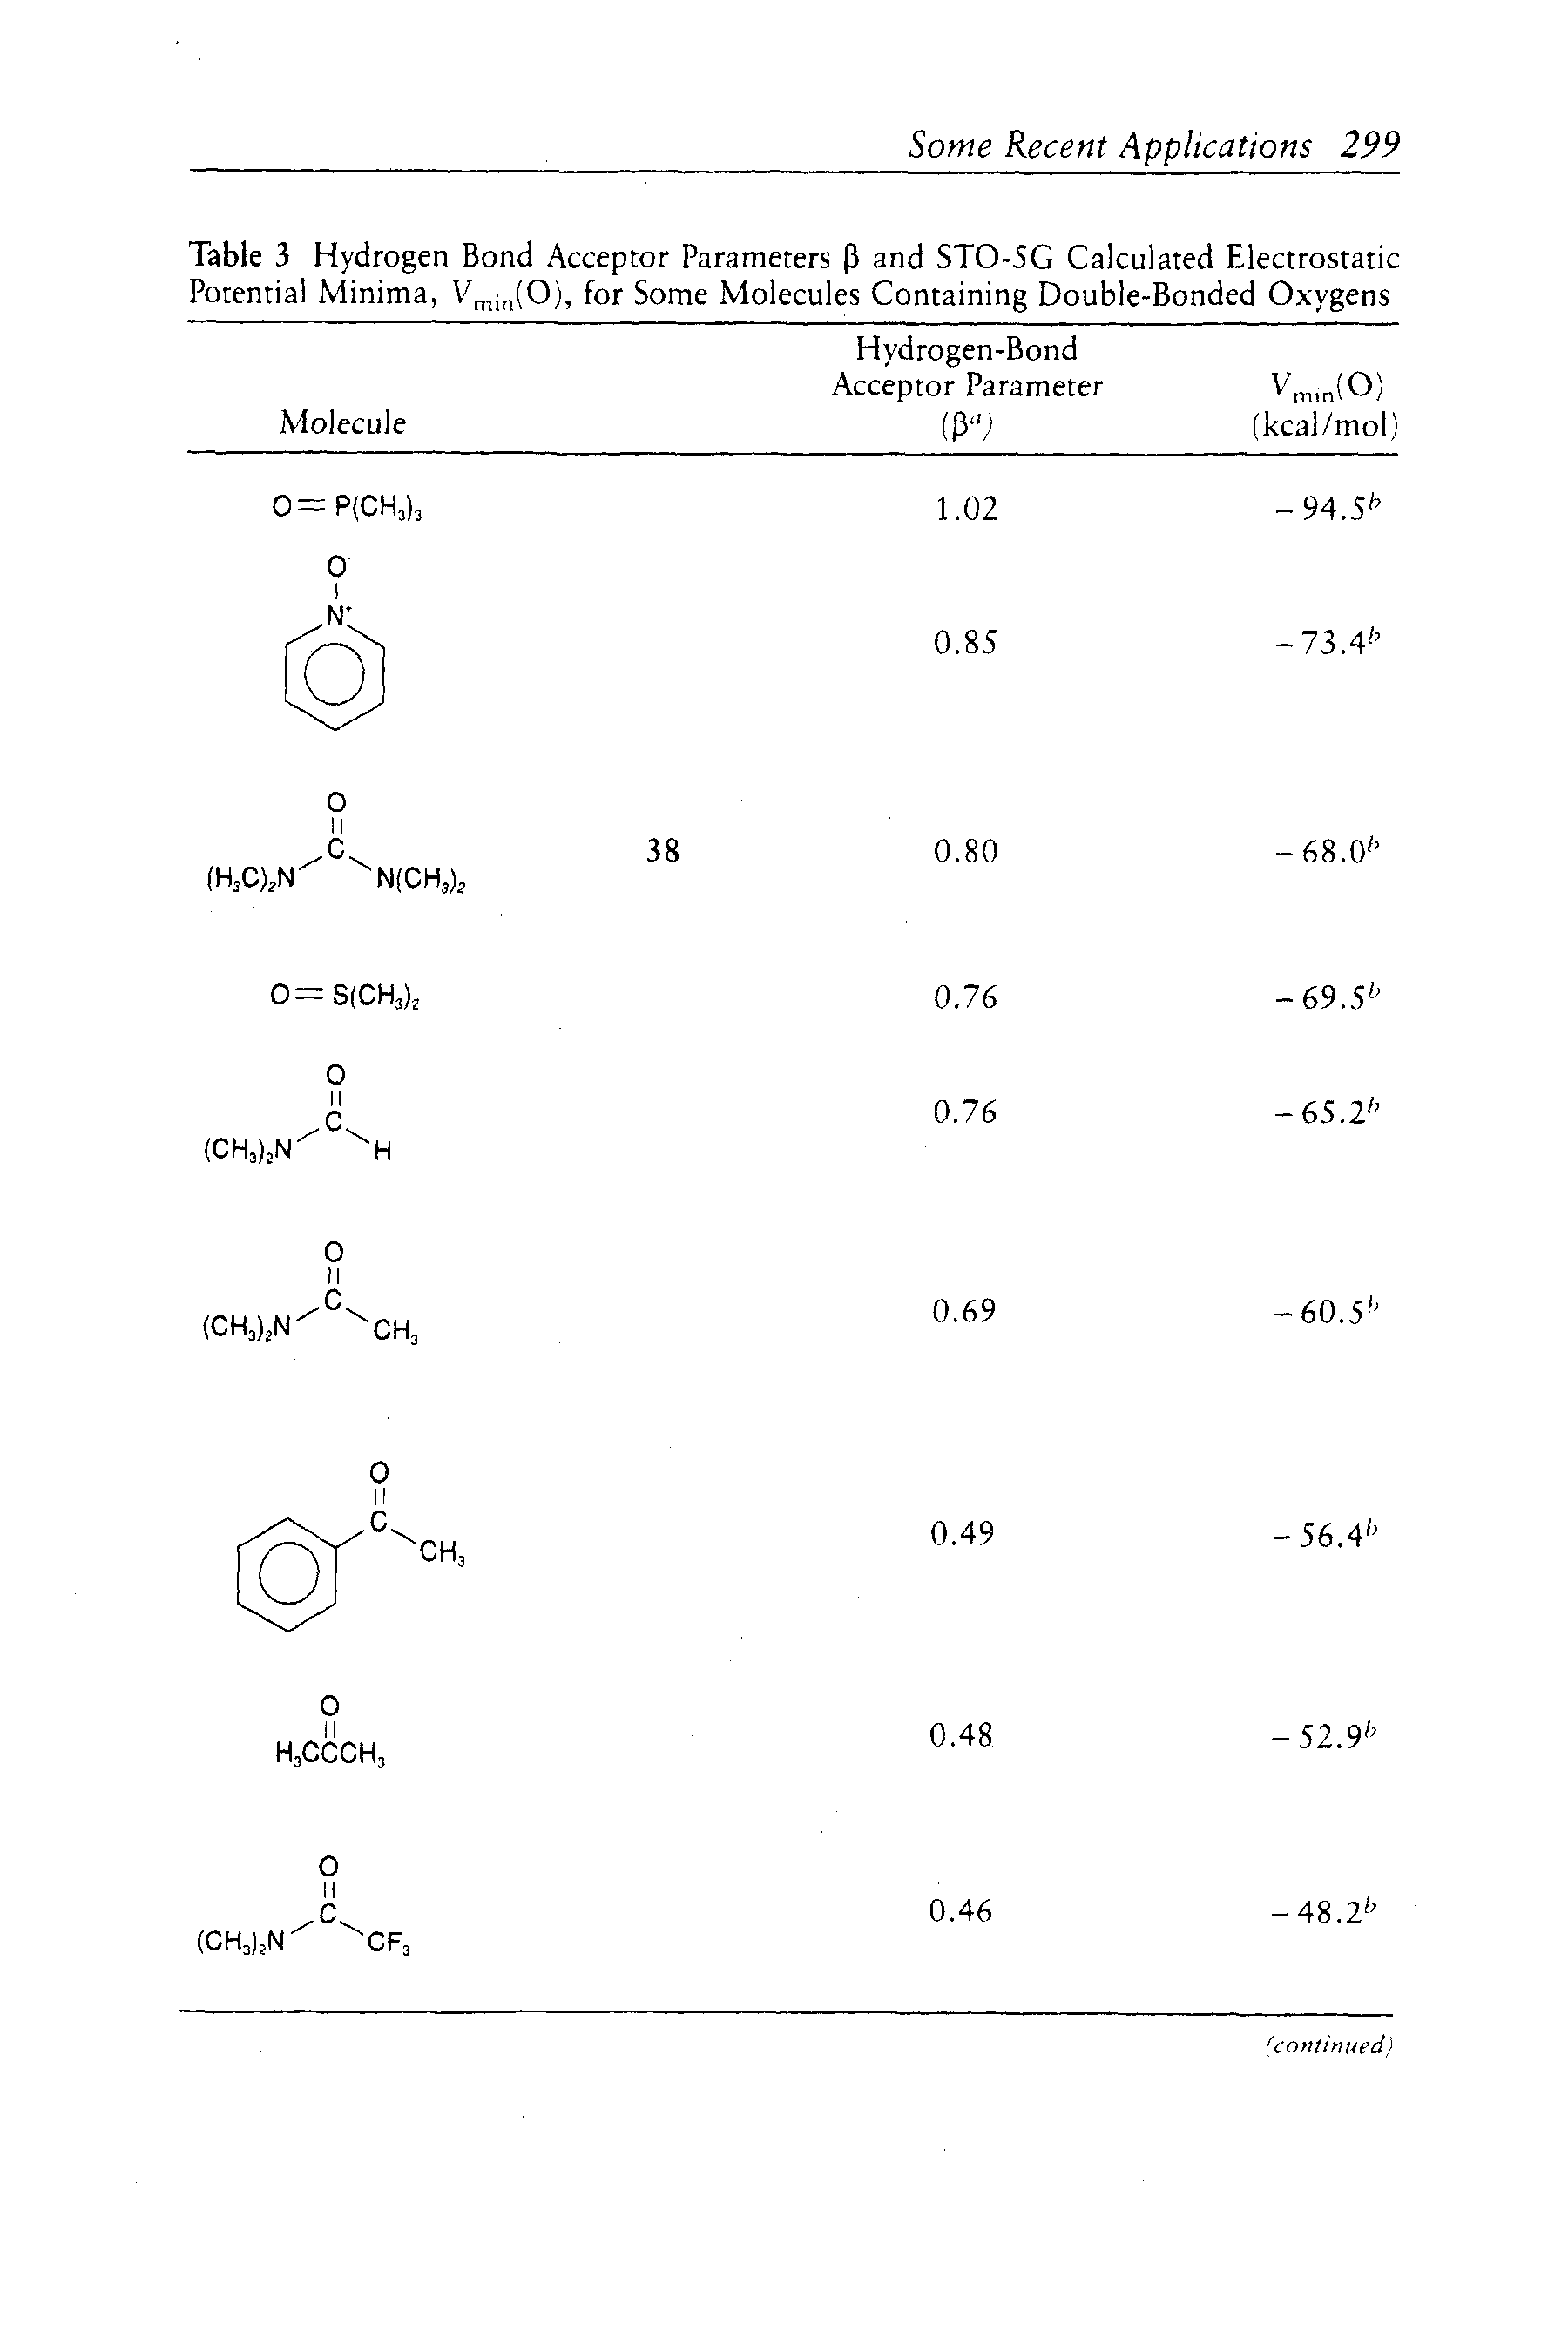 Table 3 Hydrogen Bond Acceptor Parameters P and STO-5G Calculated Electrostatic Potential Minima, V ,i (0), for Some Molecules Containing Double-Bonded Oxygens...